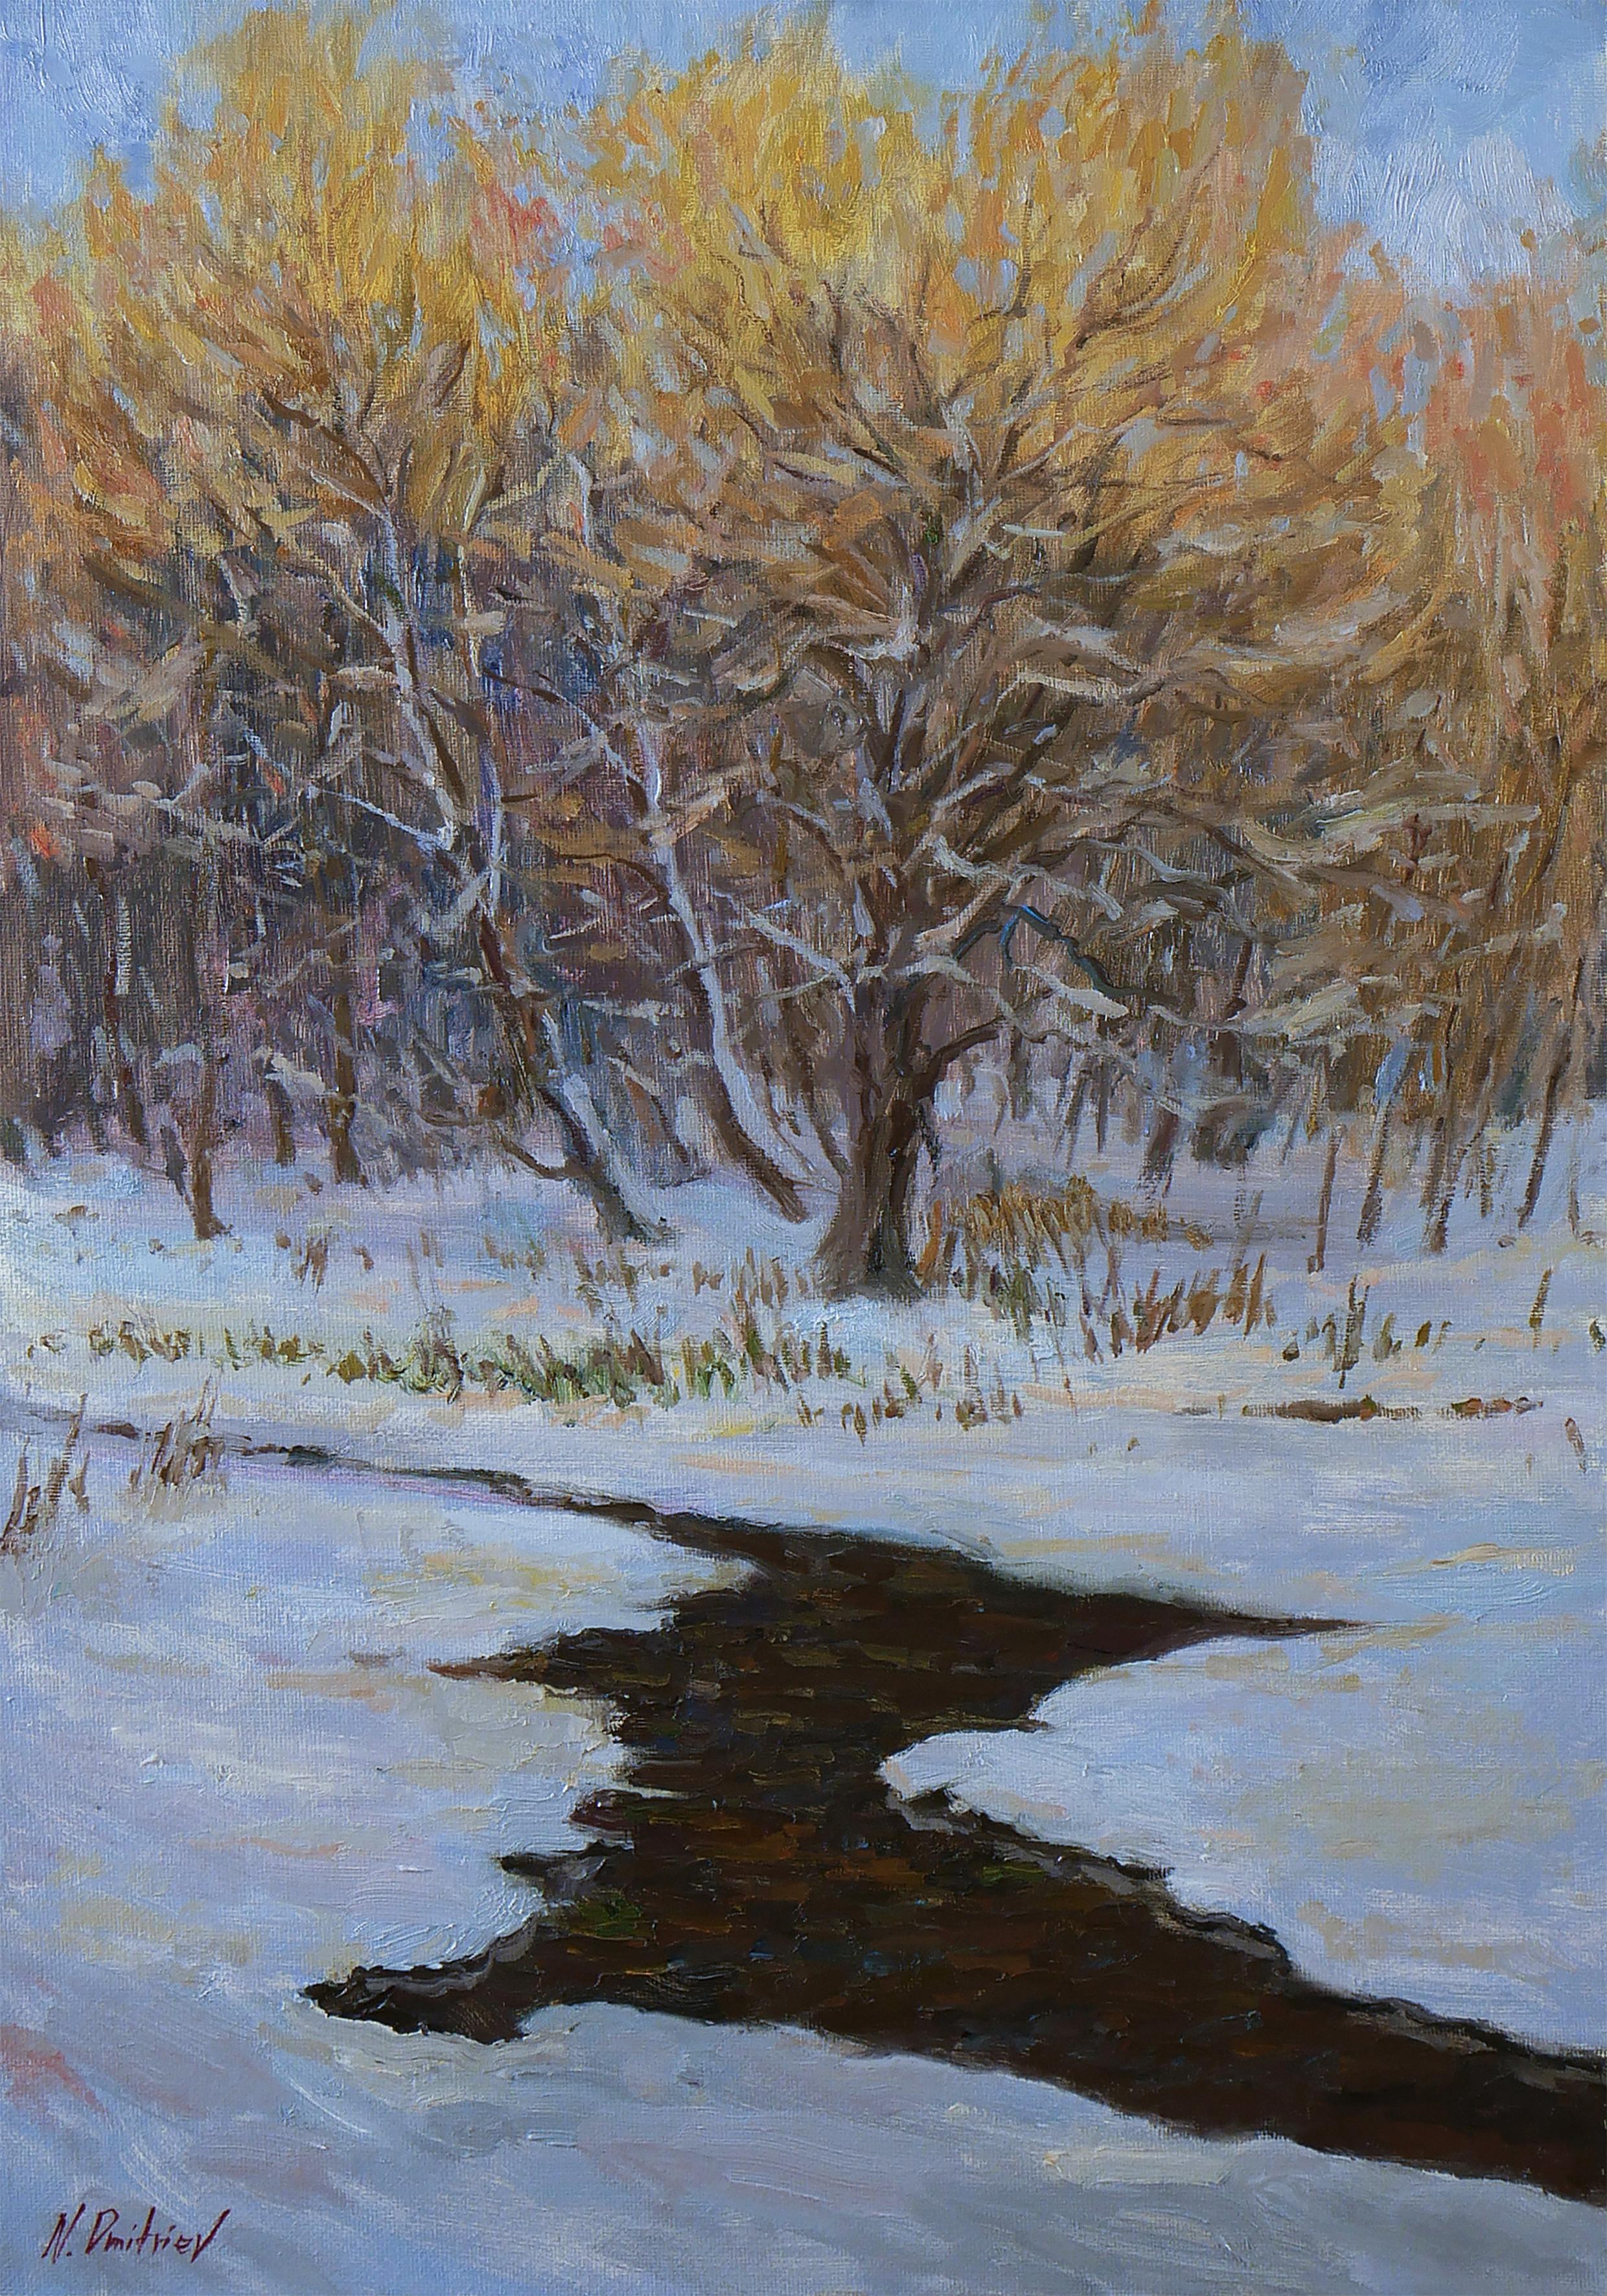 The Latest Touches Of The Winter Sun - winter river landscape painting